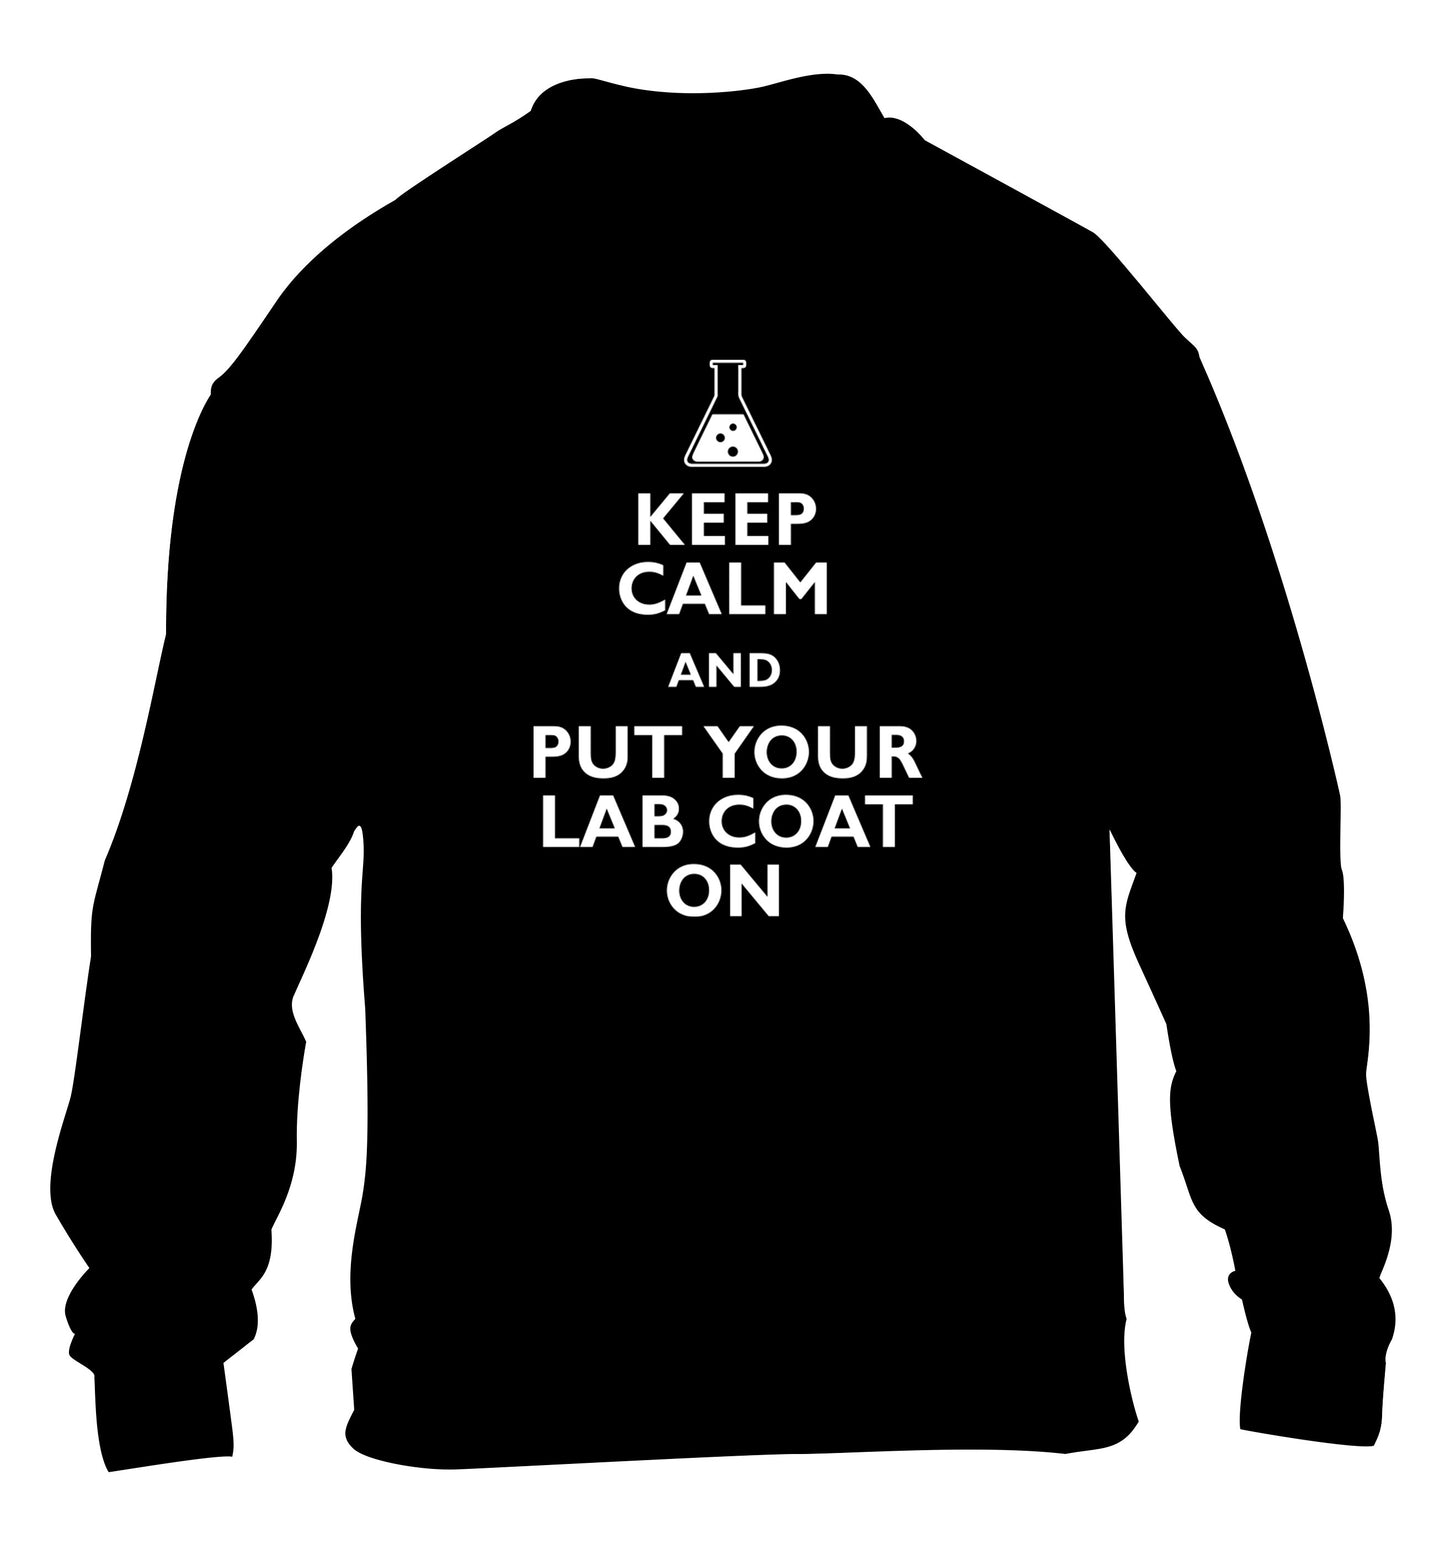 Keep calm and put your lab coat on children's black sweater 12-14 Years